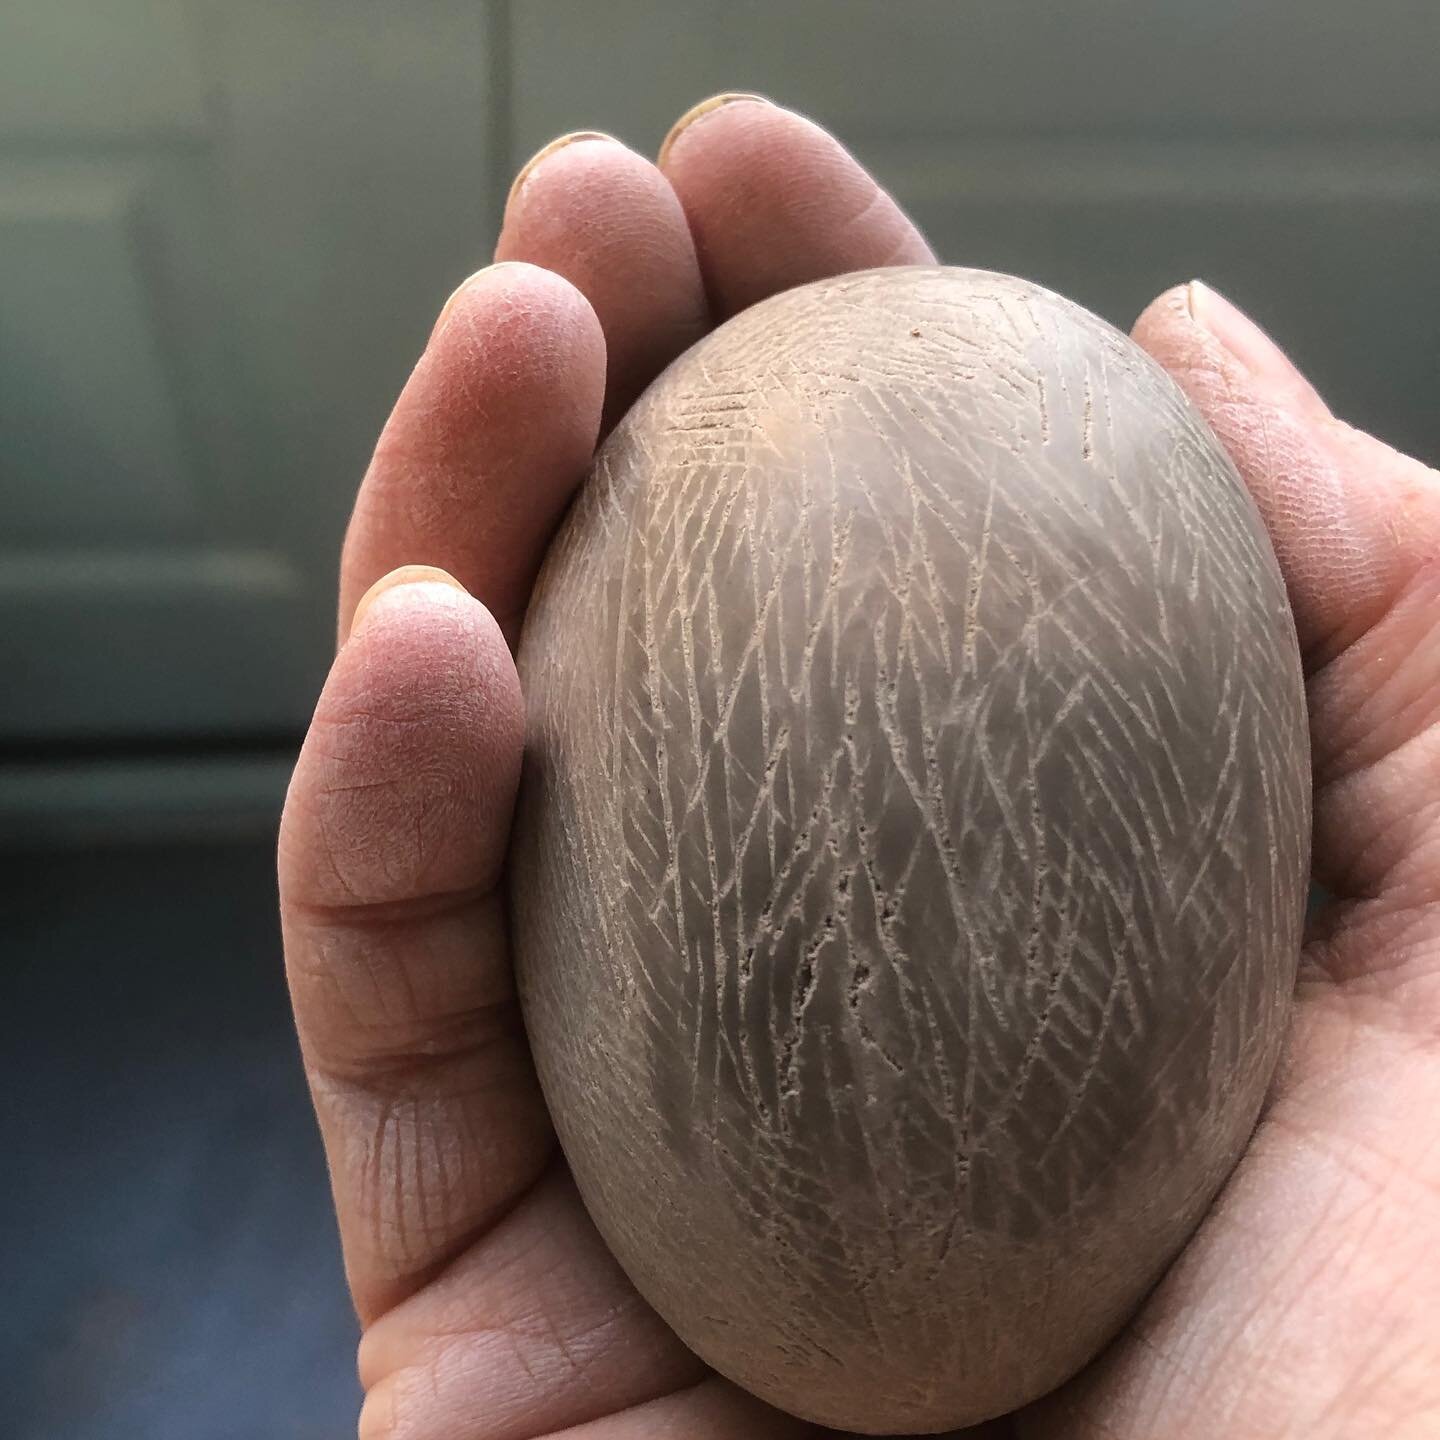 I&rsquo;ve been enjoying making some egg shaped pebbles and experimenting with texture . I just noticed that the texture matches my textured clay worn hands ! 🤣